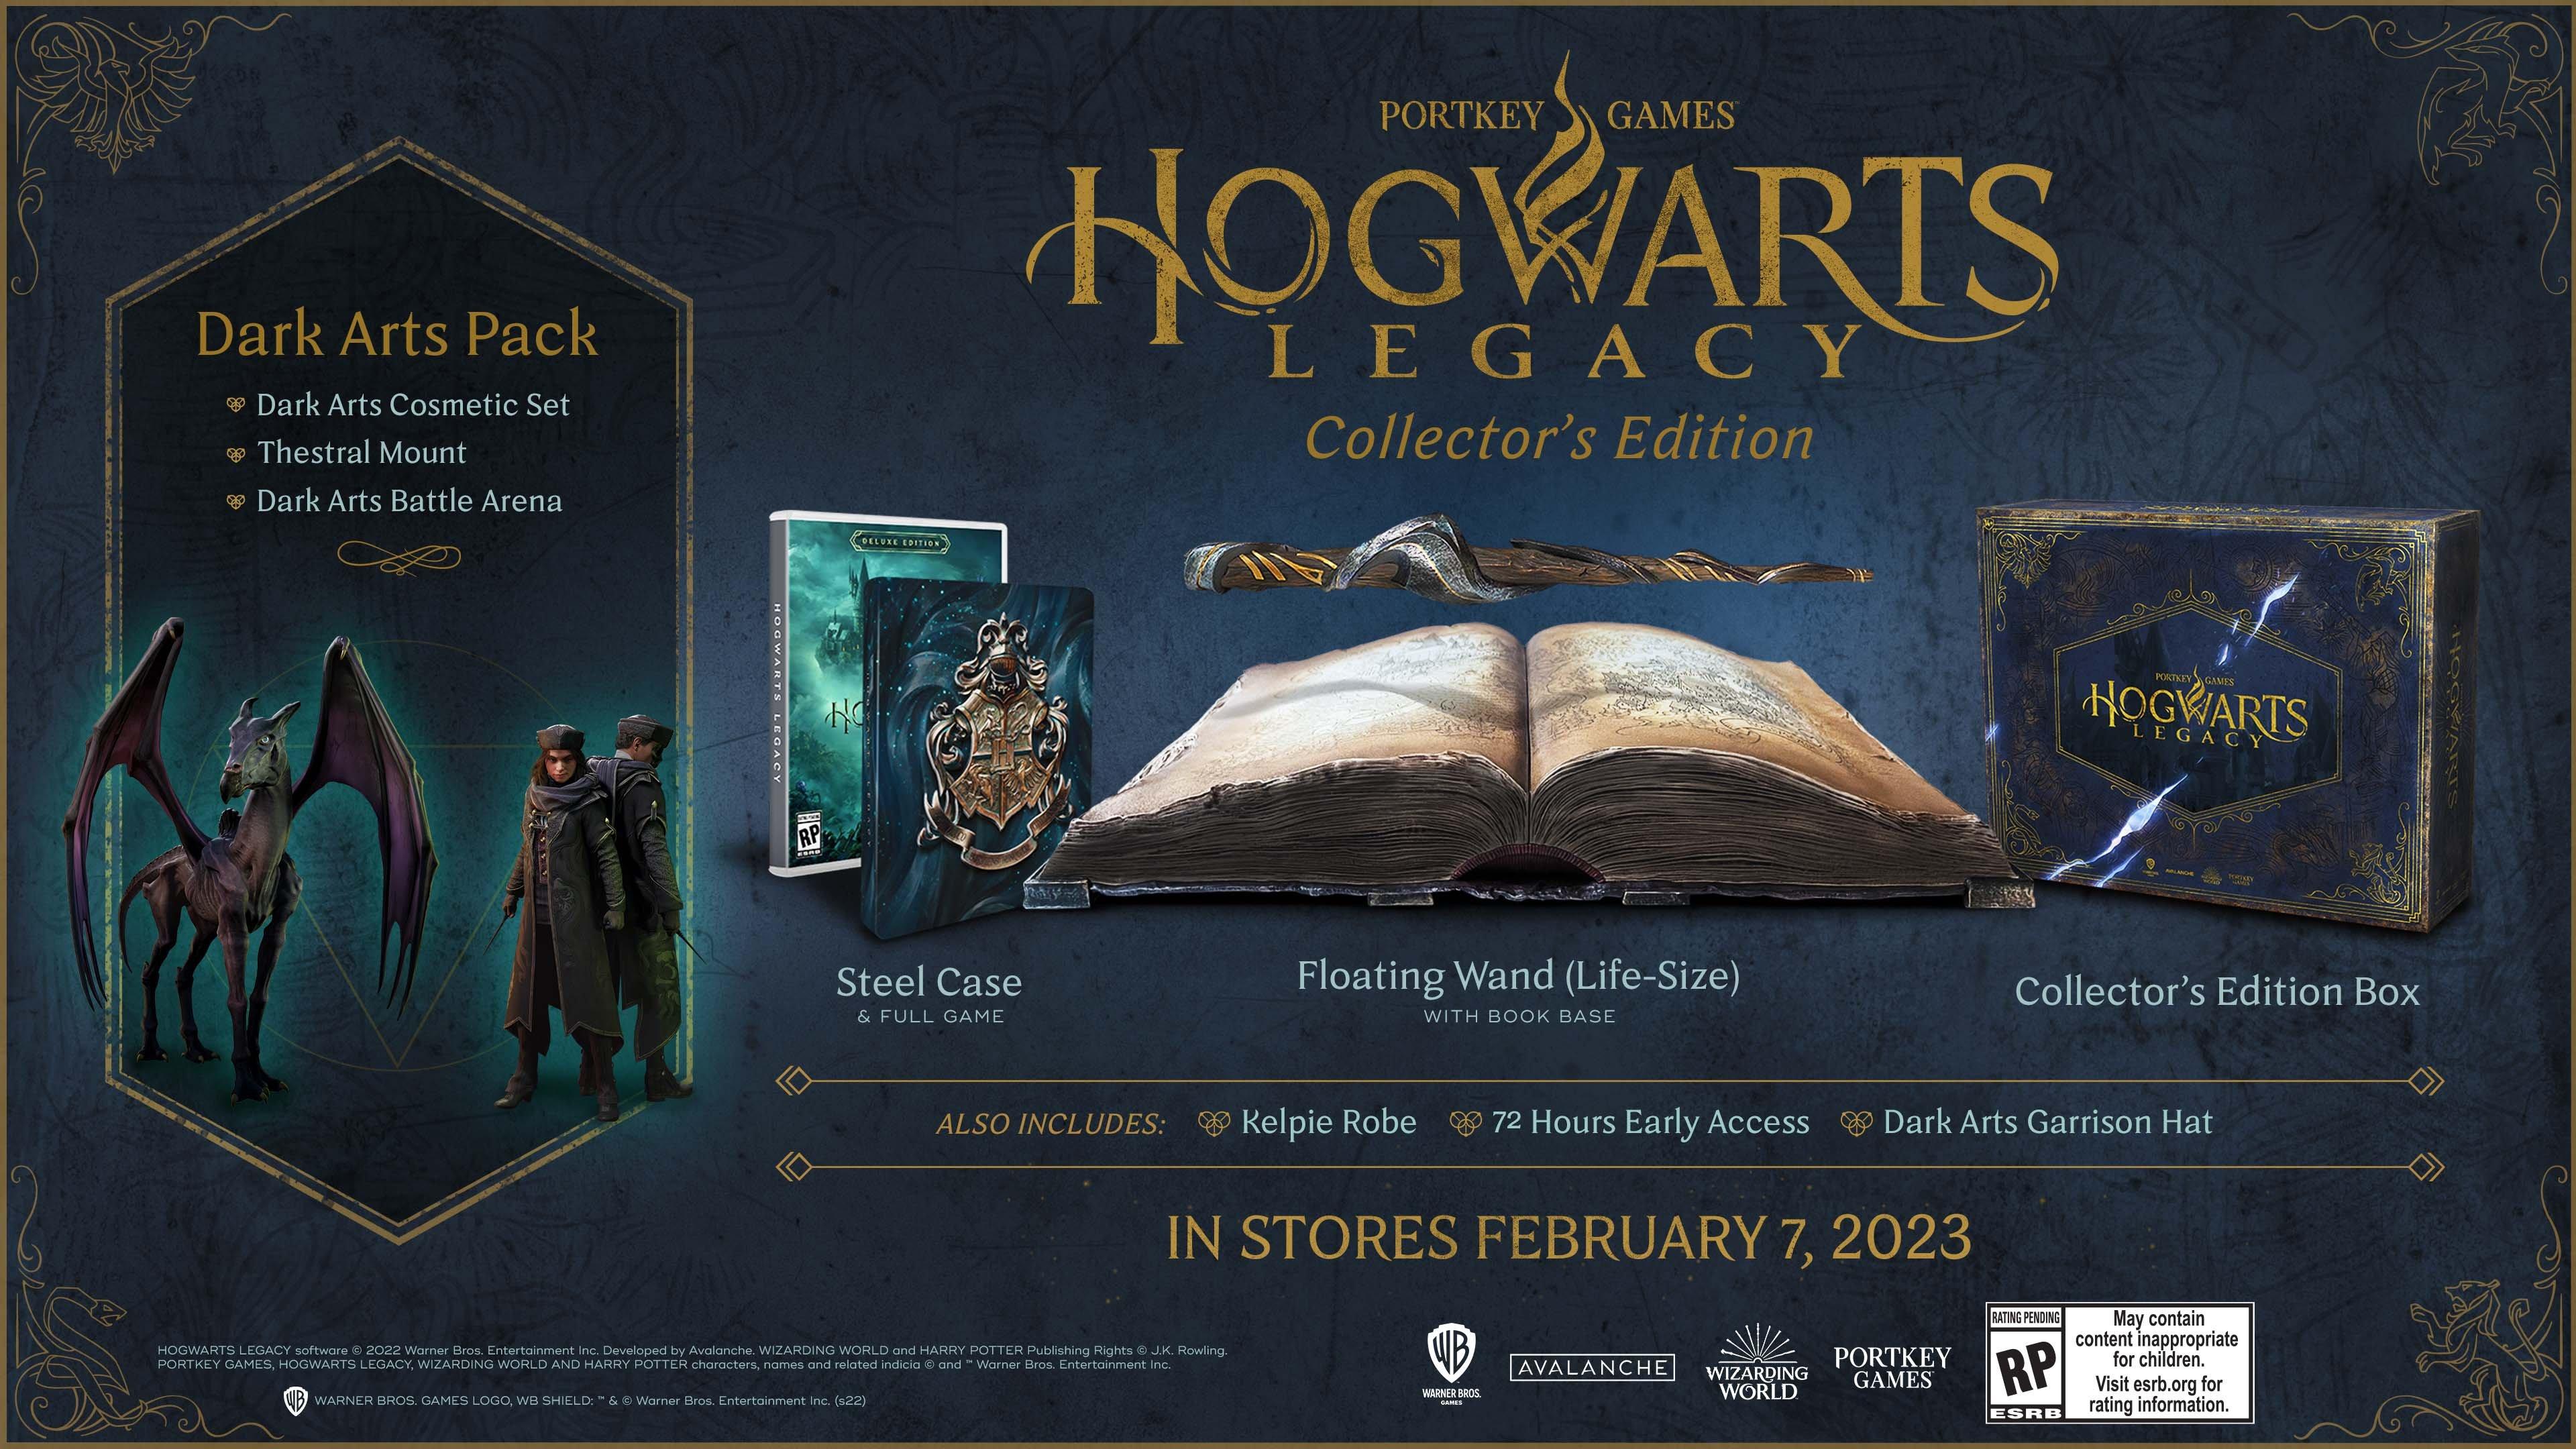 I had pre-orderer the digital deluxe edition of Hogwarts Legacy on